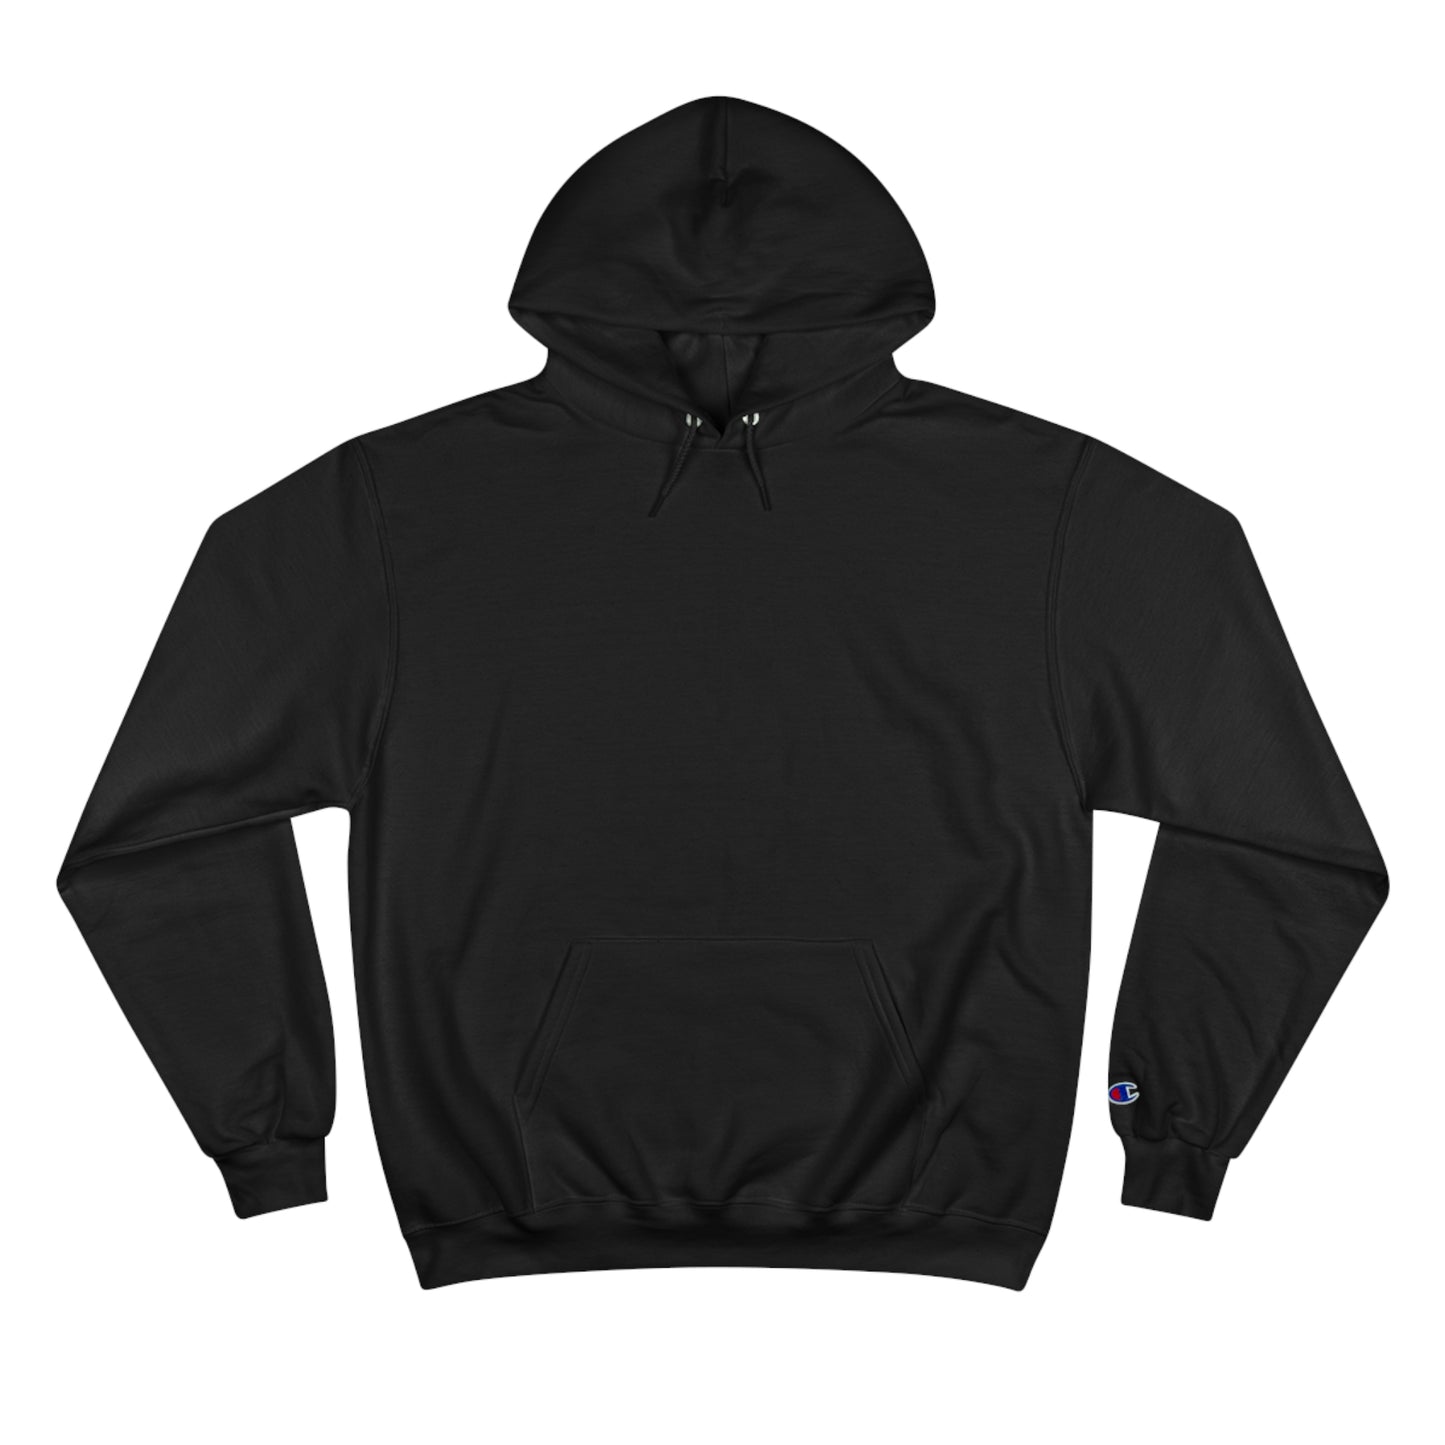 Forever Dogos Champion Hoodie